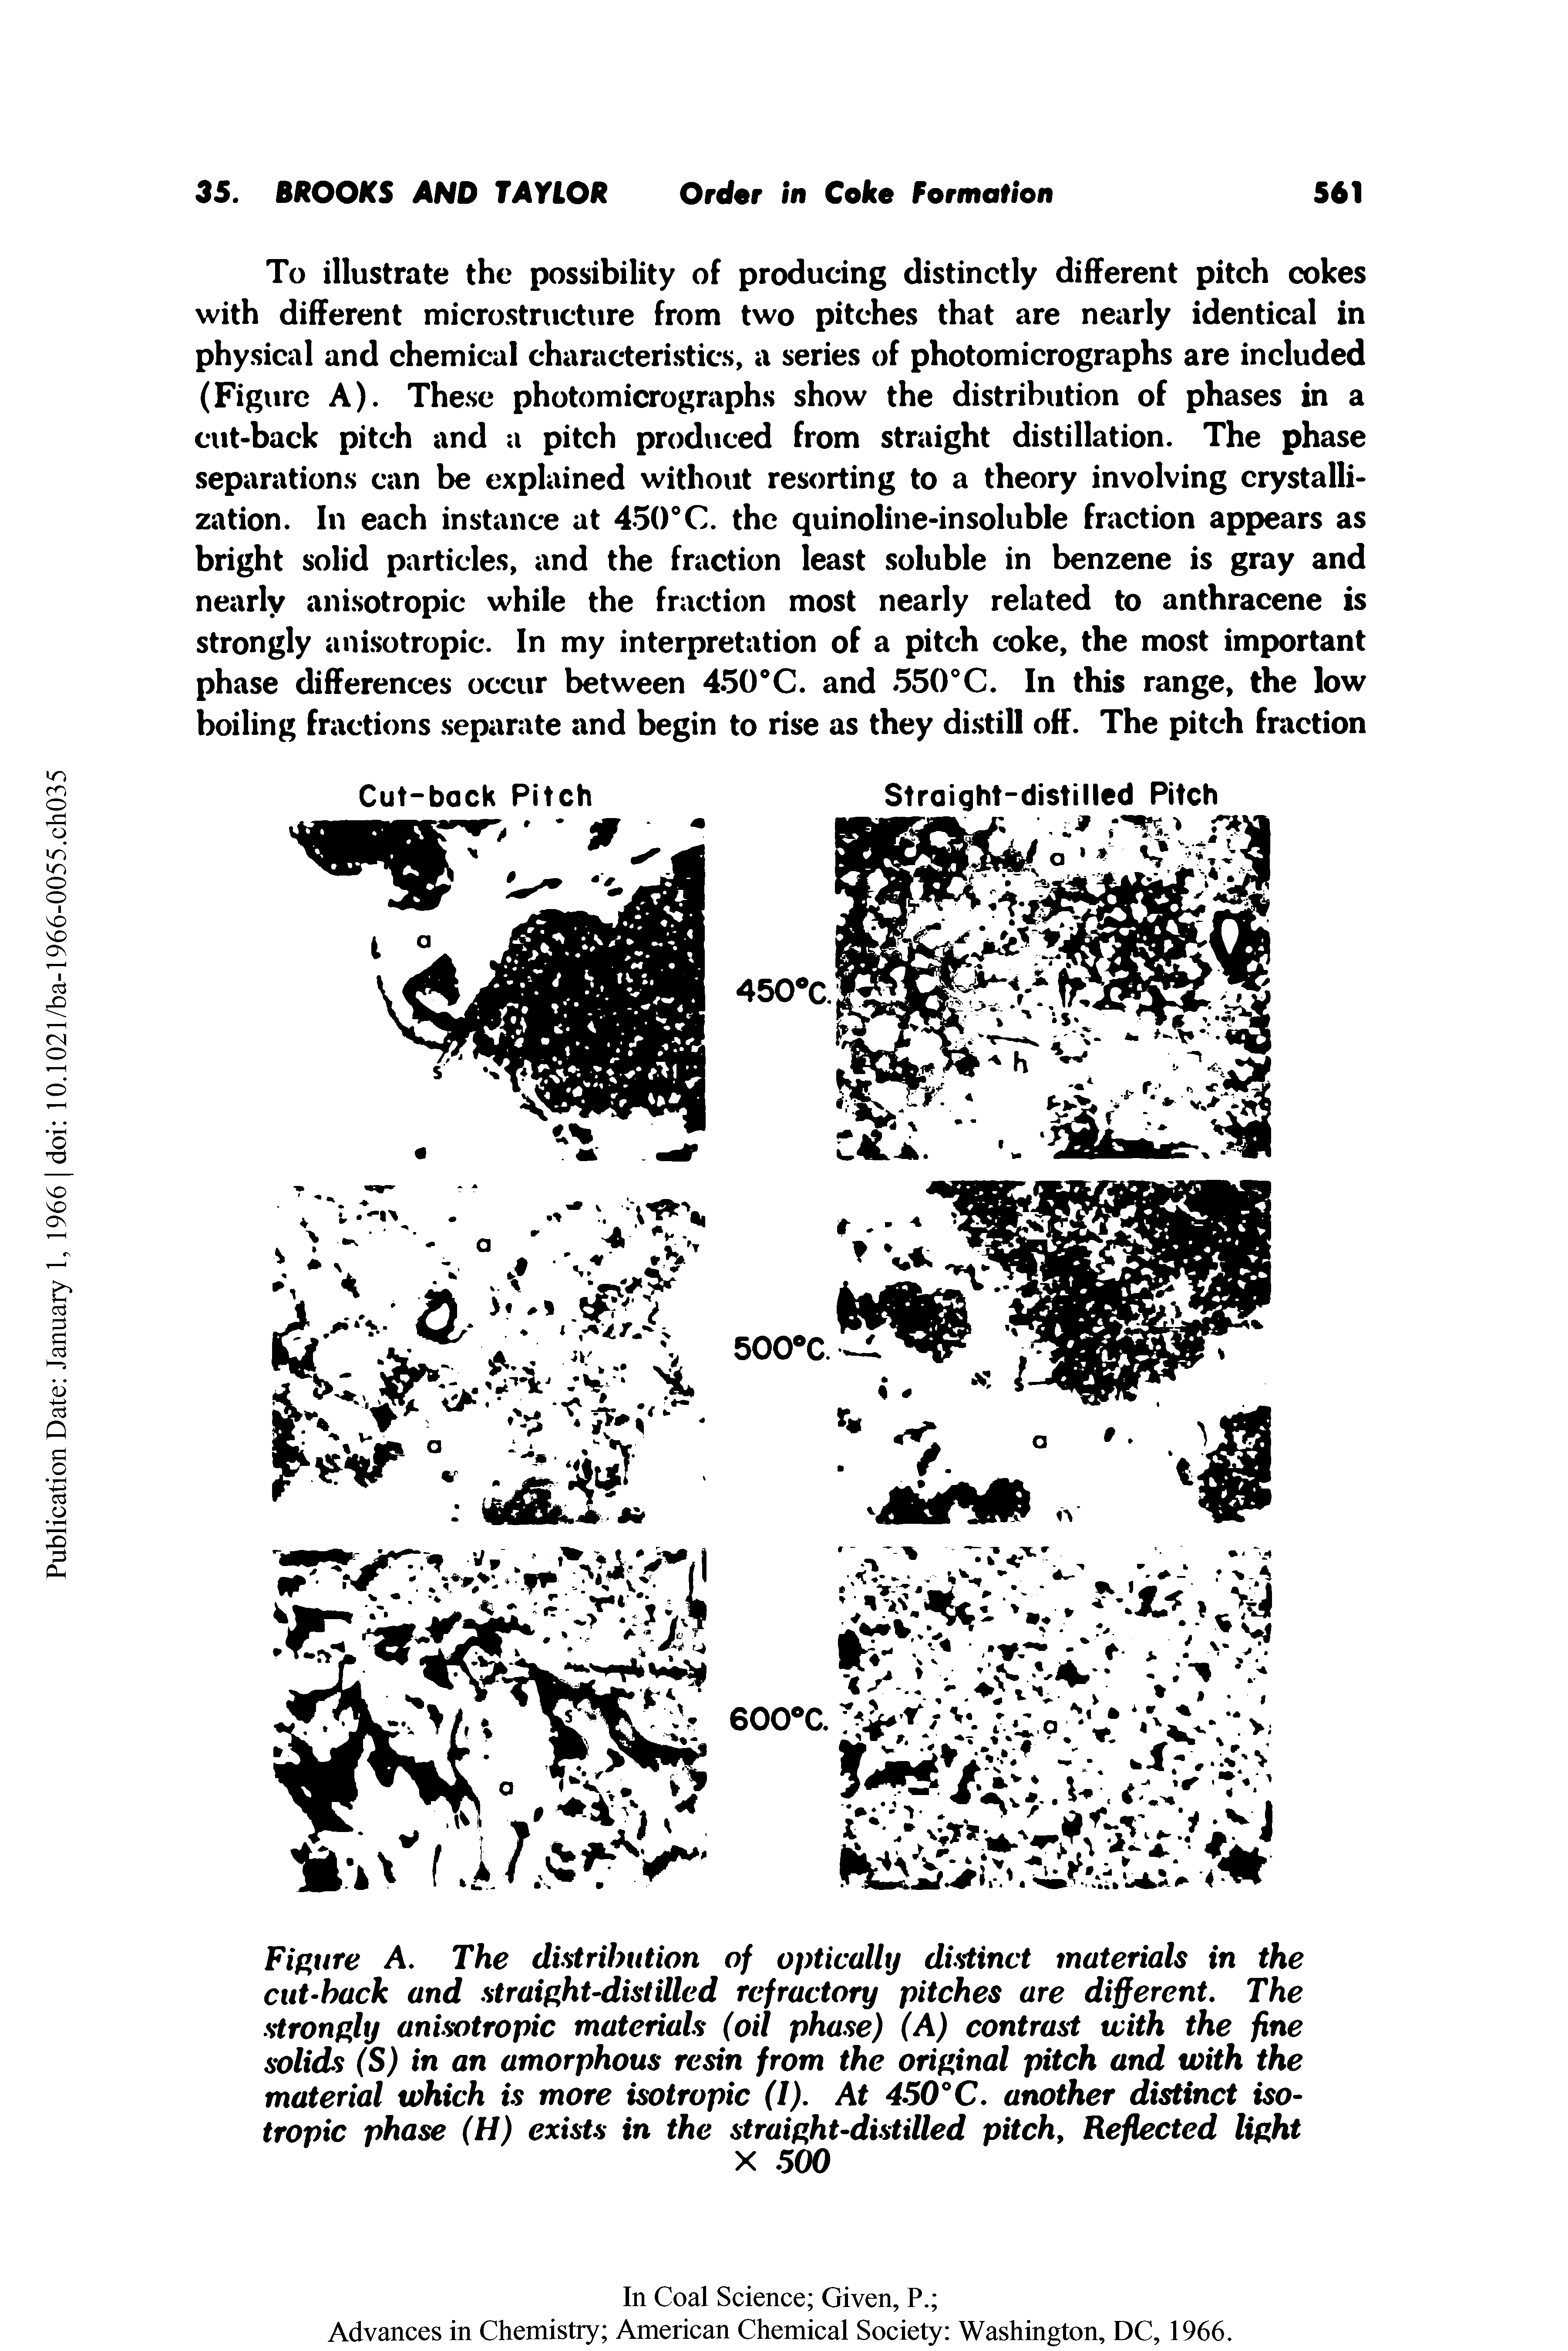 Figure A. The distribution of optically distinct materials in the cut-back and straight-distilled refractory pitches are different. The strongly anisotropic materials (oil phase) (A) contrast with the fine solids (S) in an amorphous resin from the original pitch and with the material which is more isotropic (I). At 450°C. another distinct isotropic phase (H) exists in the straight-distilled pitch, Reflected light...